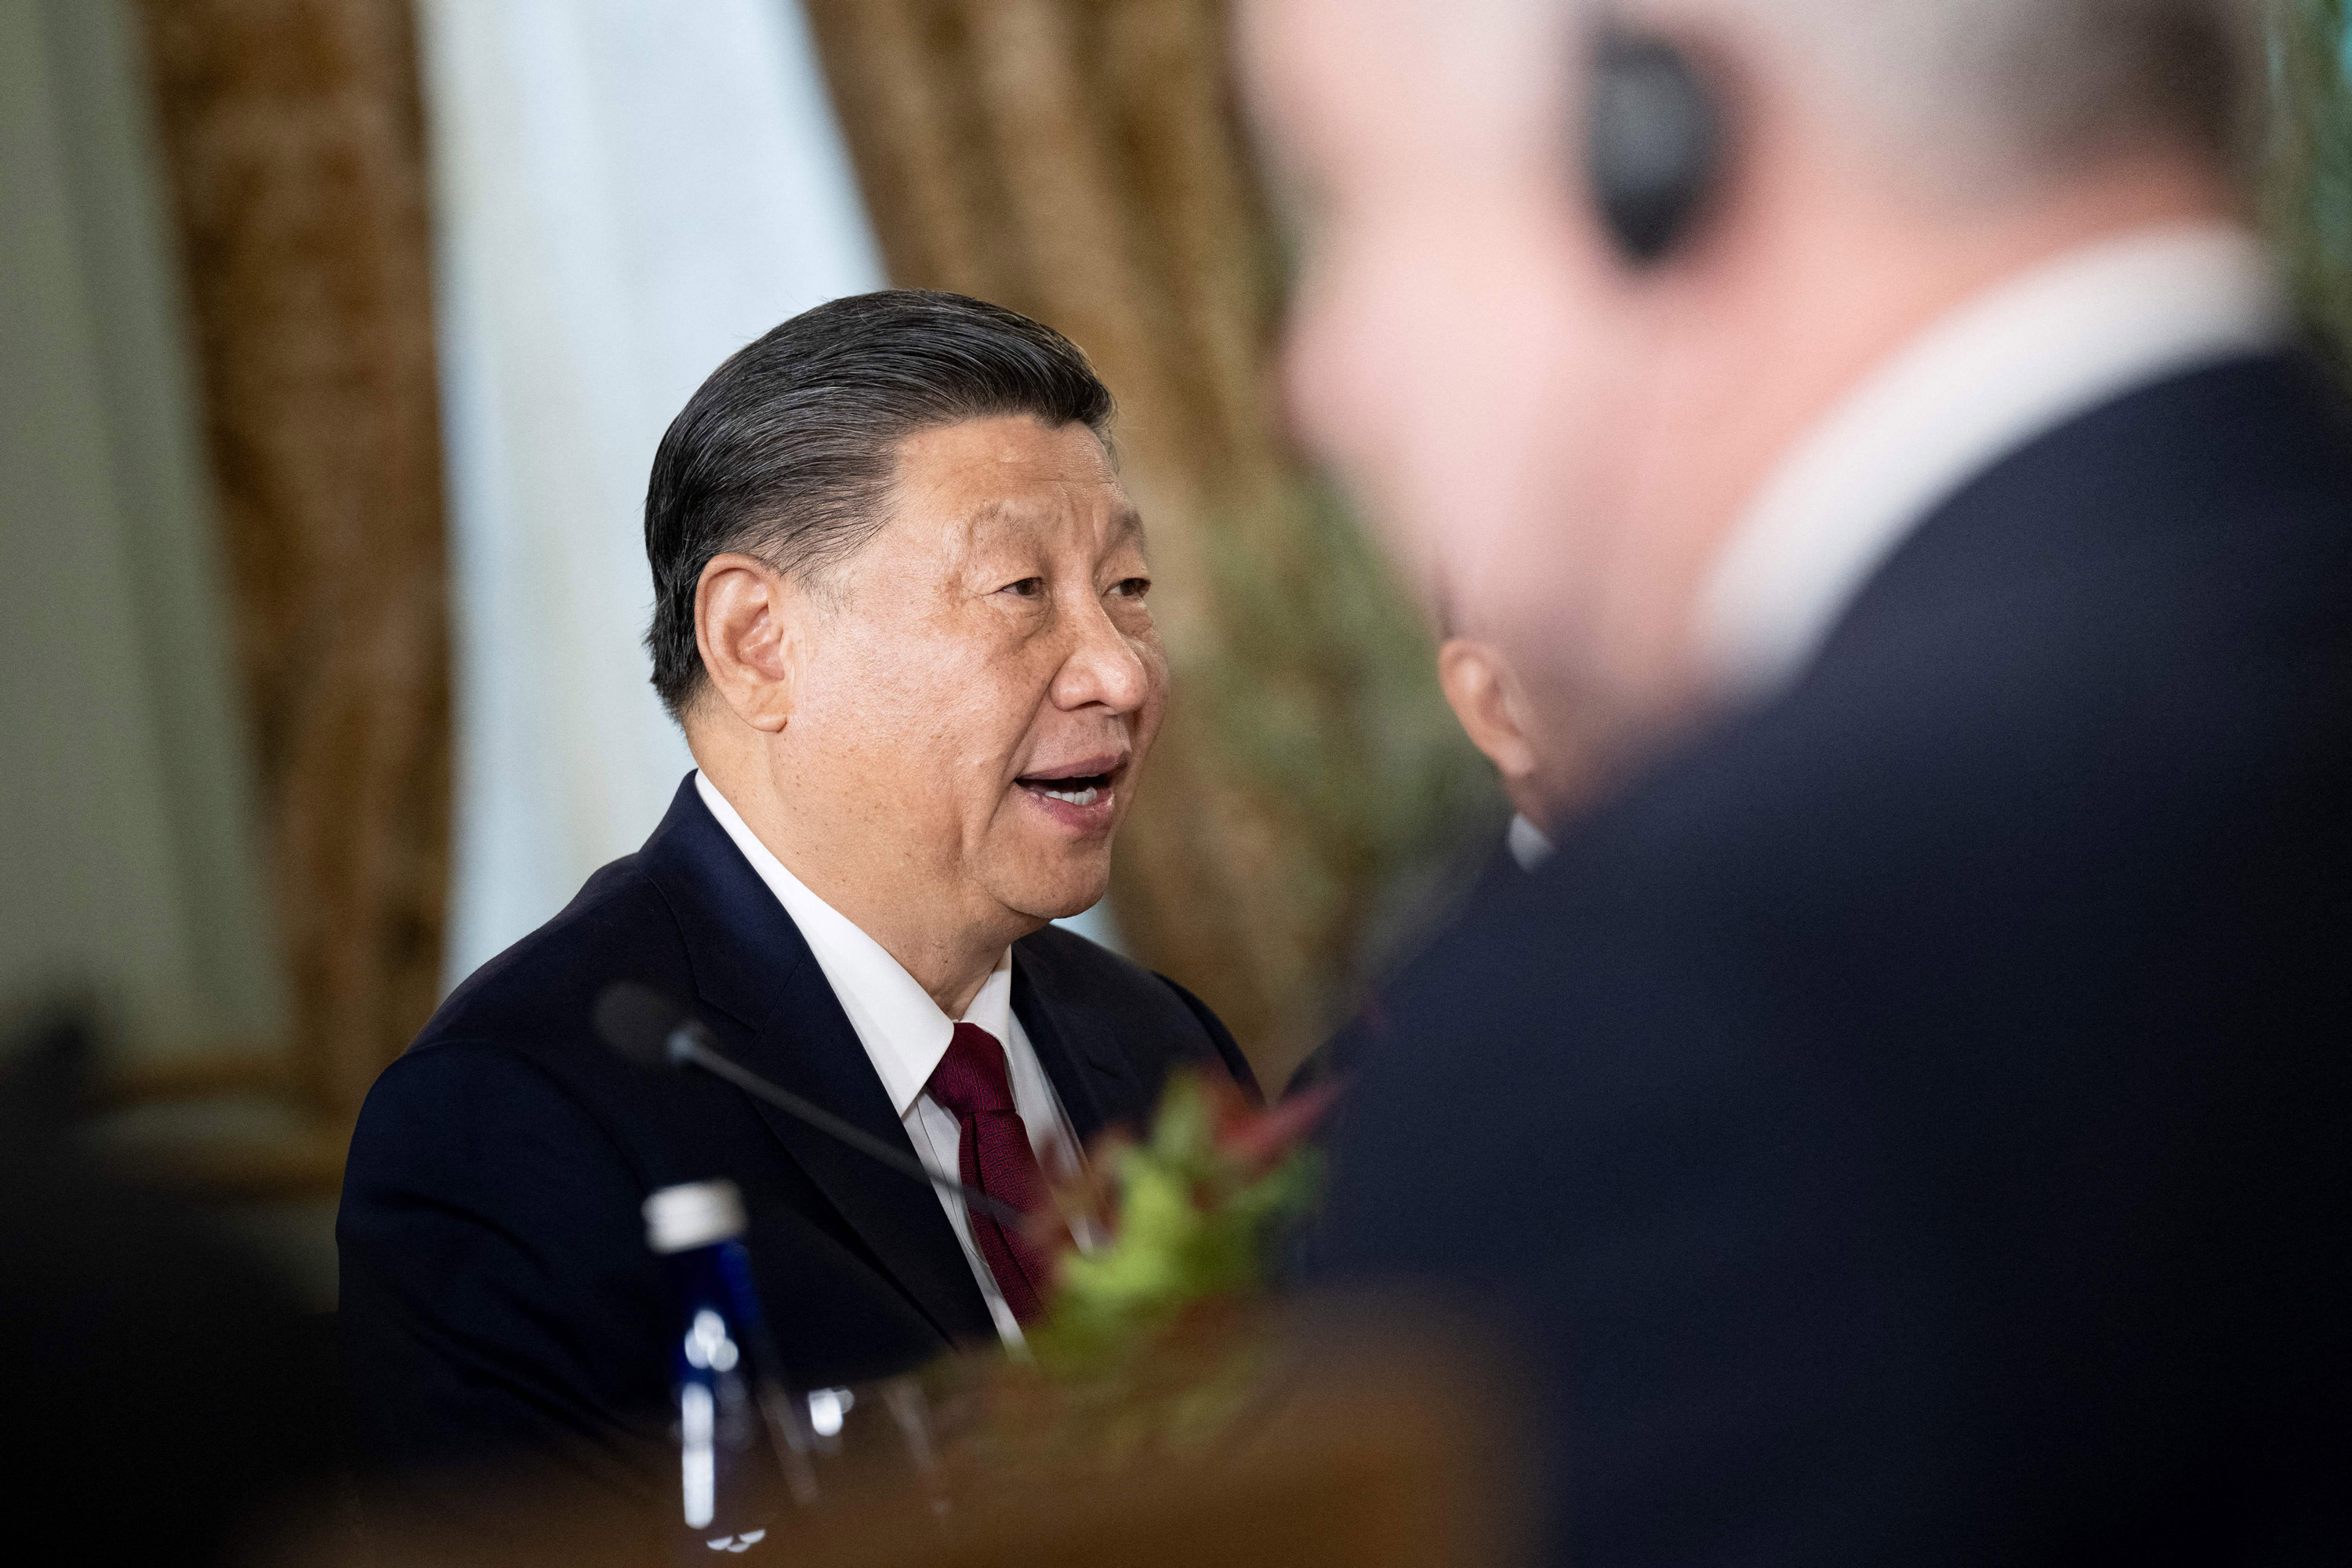 Chinese President Xi Jinping speaks during a meeting with US President Joe Biden, not pictured, during the Asia-Pacific Economic Cooperation (APEC) Leaders' week in Woodside, California, on November 15.